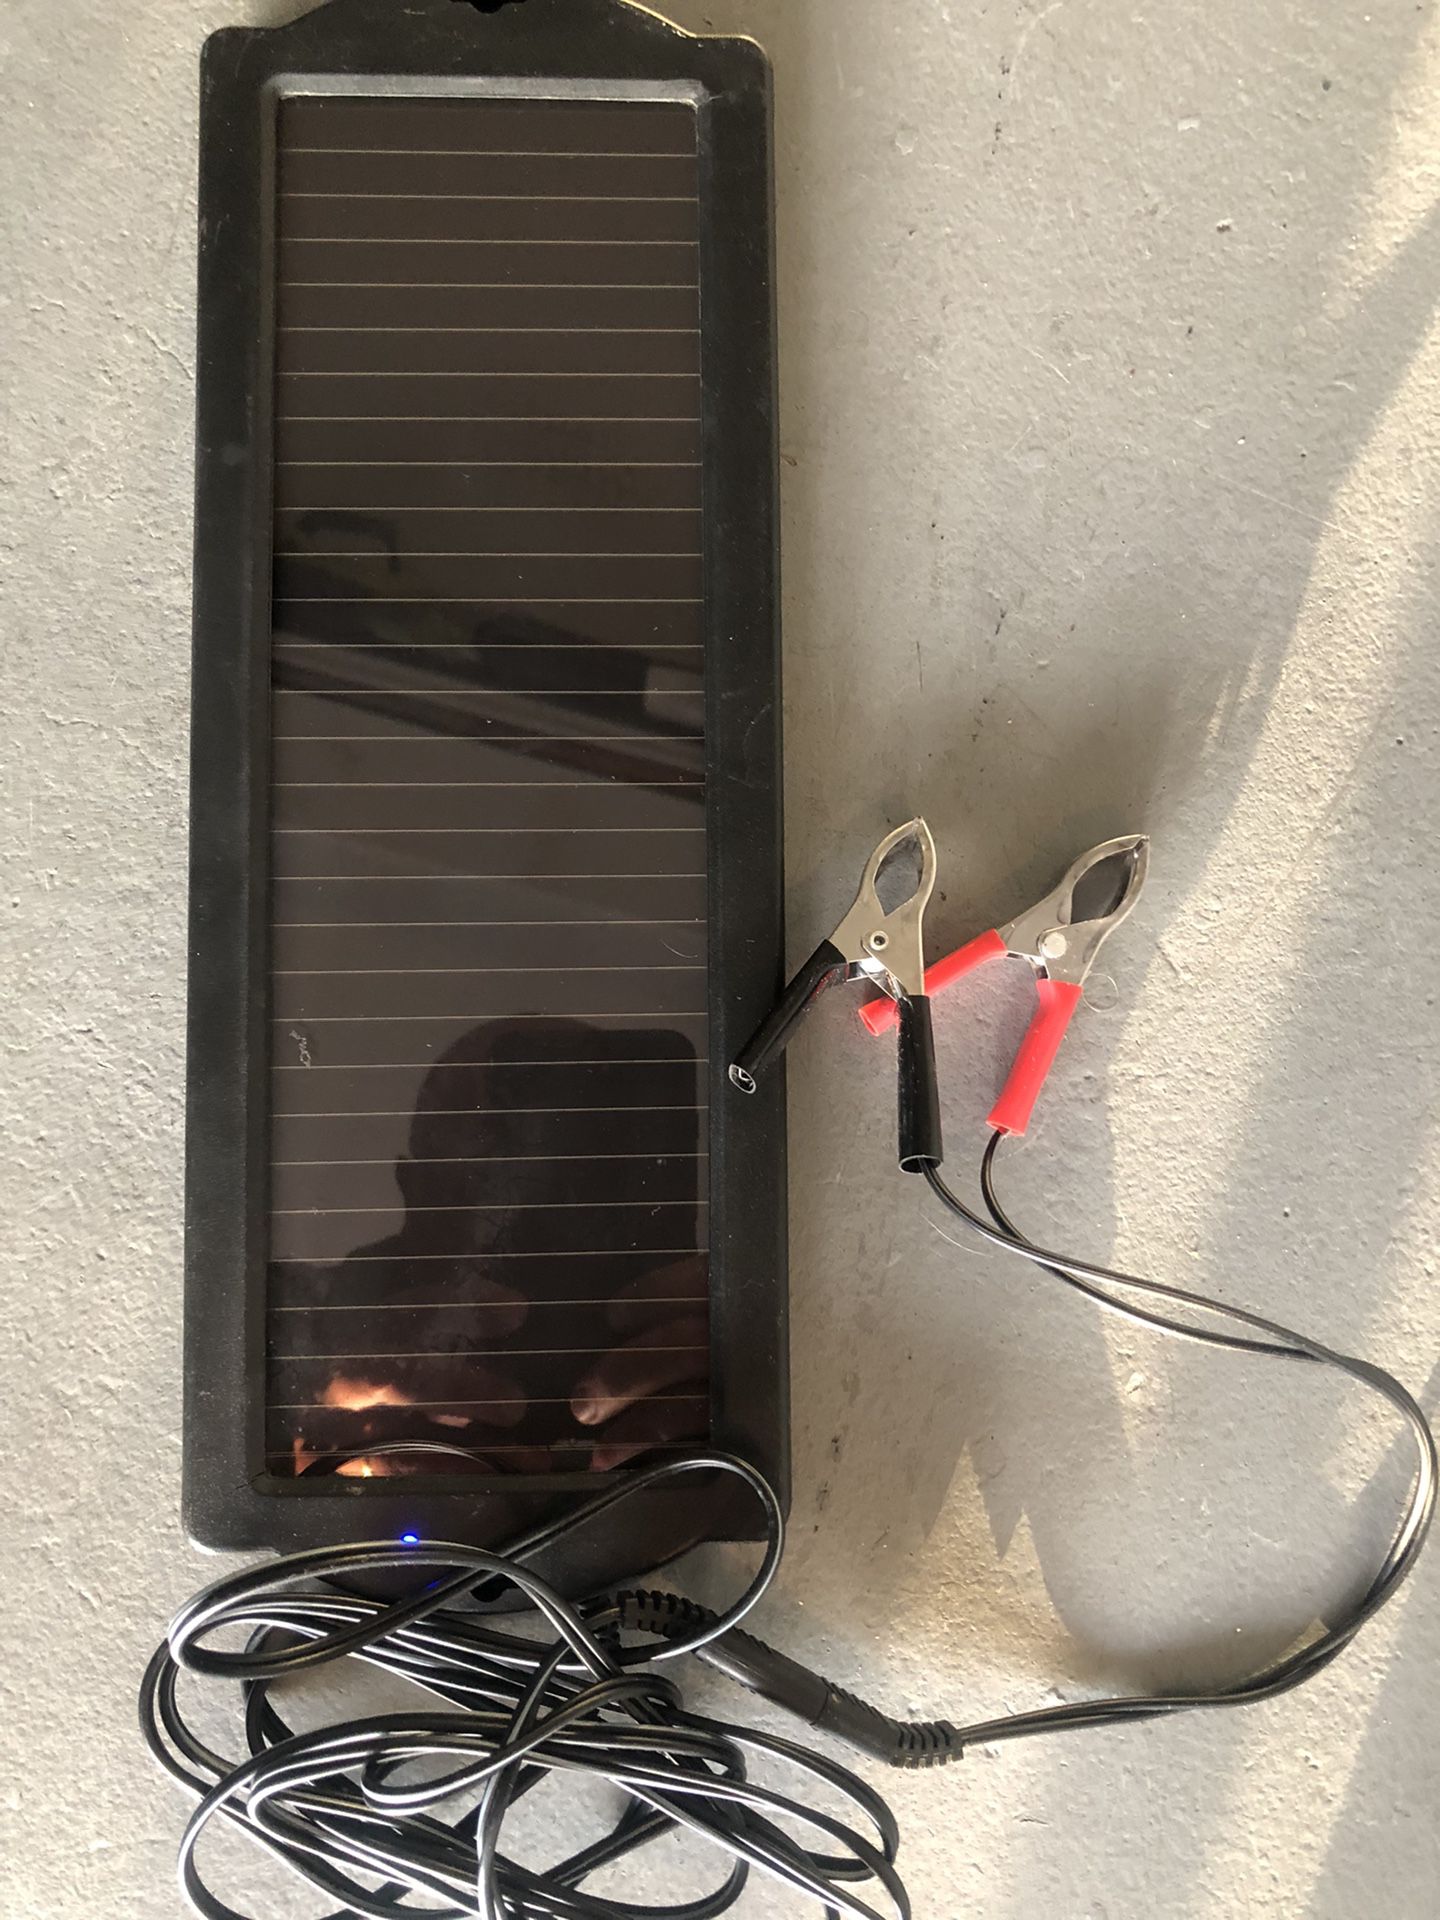 Solar battery charger